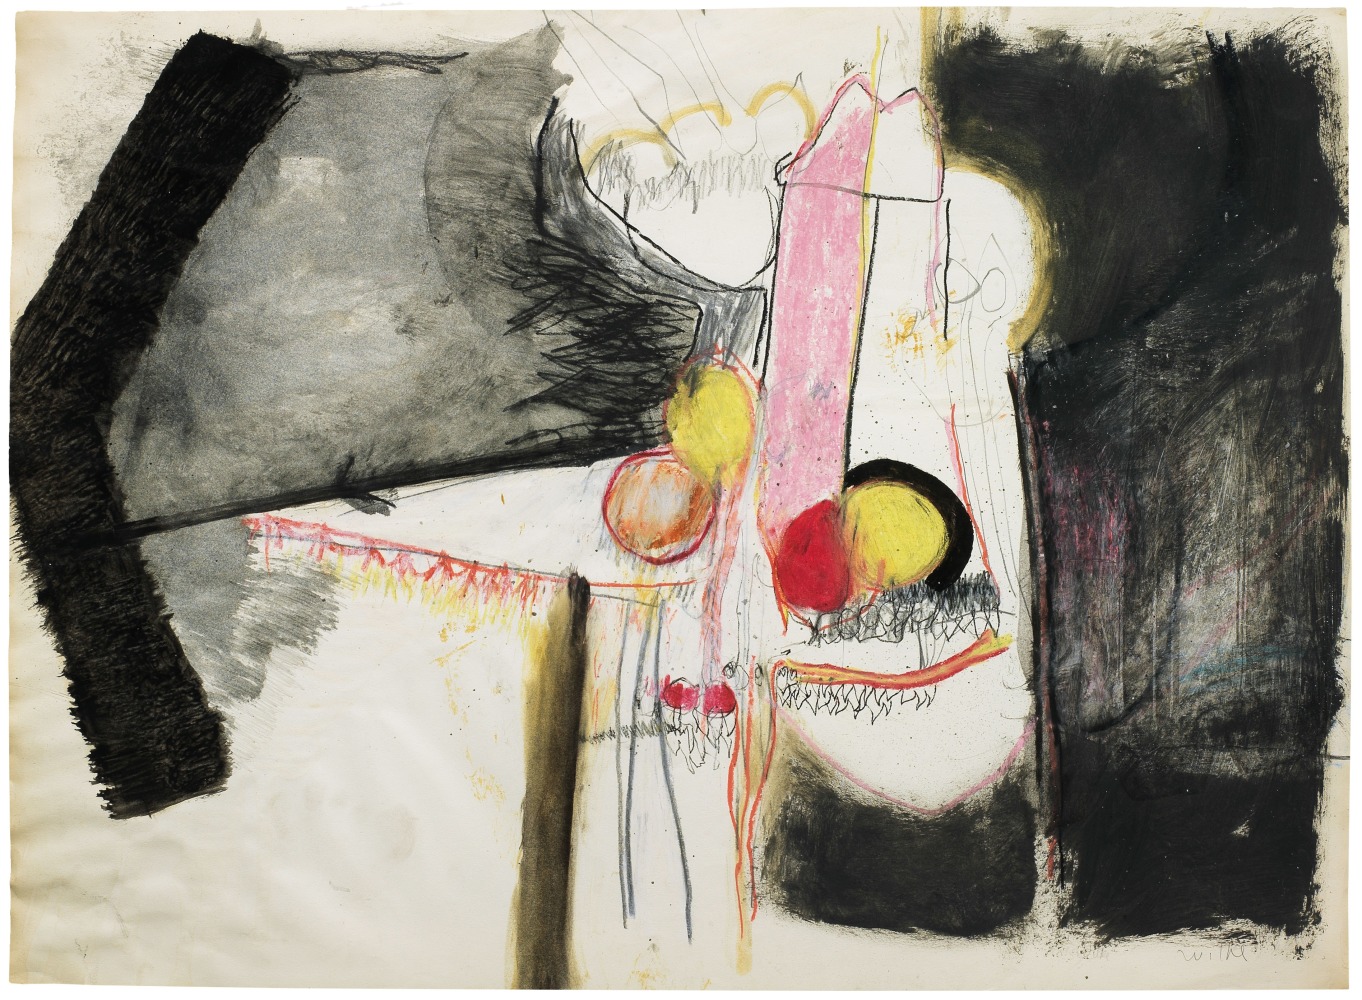 [FIG. 4]

Hannah Wilke

Untitled, c. 1962-66
Graphite, charcoal, paint, crayon, and colored pencil on paper
22 &amp;times; 30&amp;nbsp;inches (55.9 &amp;times; 76.2 cm)
Collection of Amy Gold and Brett Gorvy
Image&amp;nbsp;courtesy Alison Jacques Gallery, London.&amp;nbsp;
Photo&amp;nbsp;by Michael Brzezinski.